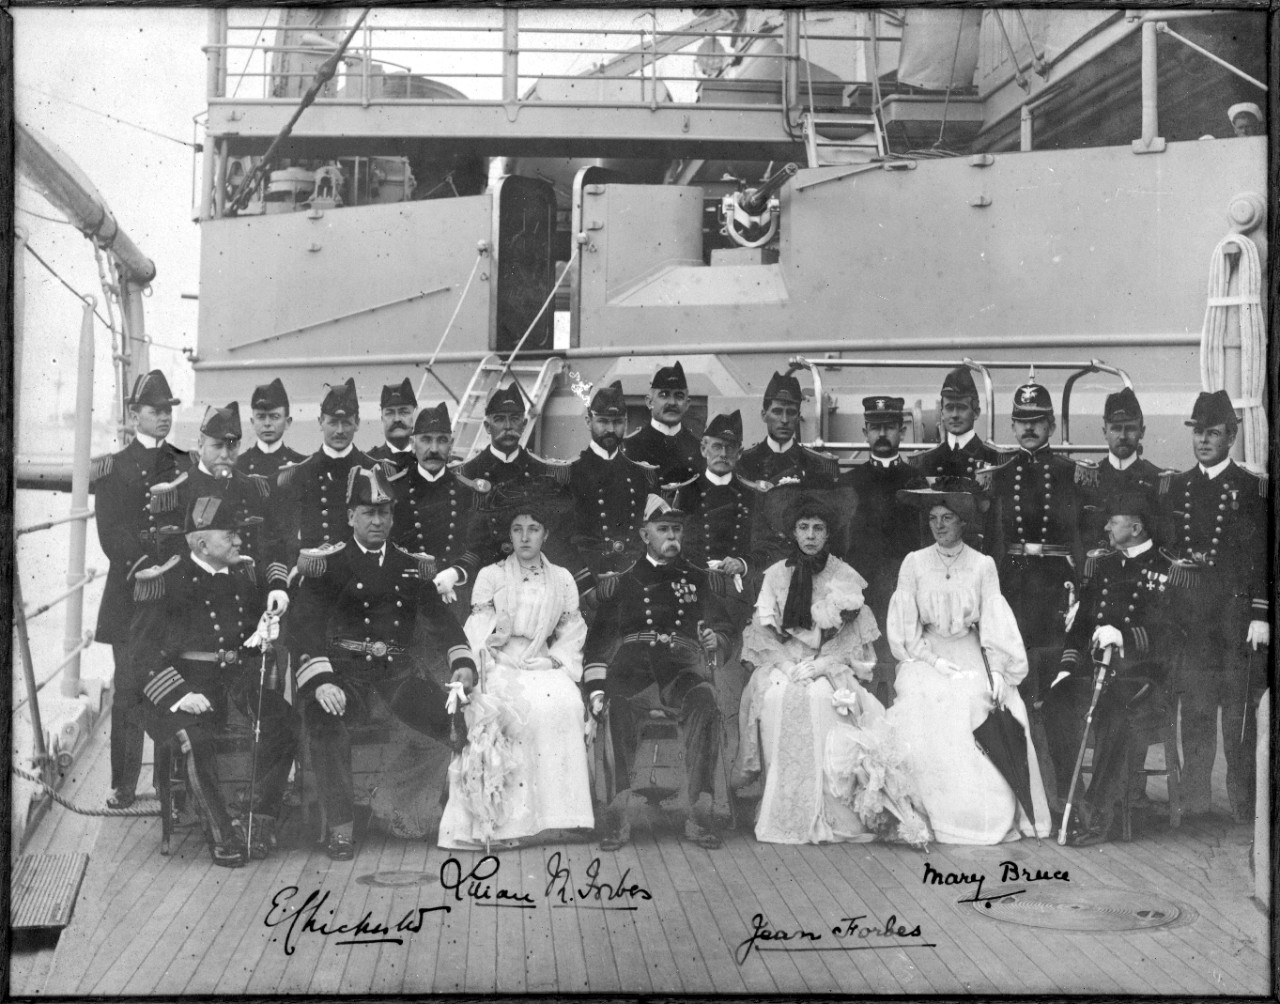 Officers, three ladies, and a British flag officer pose for the photographer on board Kearsarge at Portsmouth, England, 13 July 1903. Seated in the front row are (left to right): Capt. Joseph N. Hemphill, the ship’s commanding officer; Rear Adm. Sir Edward Chichester, RN; Lilian M. Forbes; Rear Adm. Charles S. Cotton; Jean Forbes; Mary Bruce; and an unidentified U.S. Navy commander. Identifiable among those standing are: Ens. Henry G.S. Wallace (behind Hemphill); and Lt. Charles L. Hussey, Cotton’s flag secretary (sporting a full beard, and behind the admiral). (Naval History and Heritage Command Photograph NH 105058)